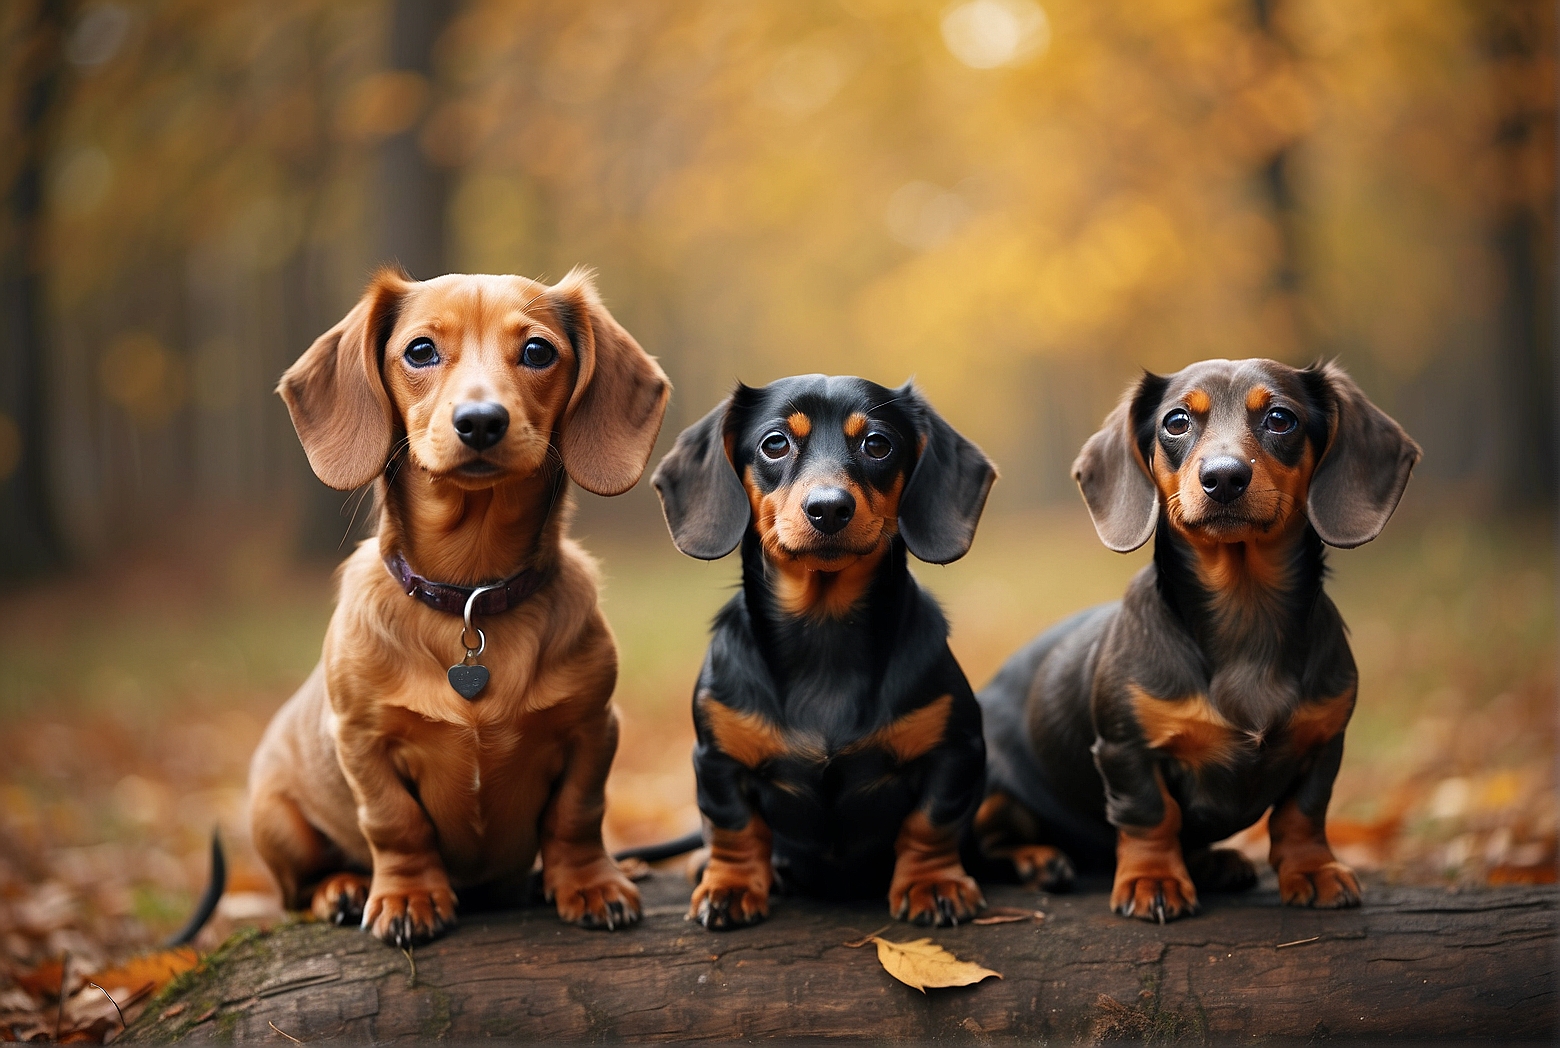 How Many Dachshund Breeds Are There